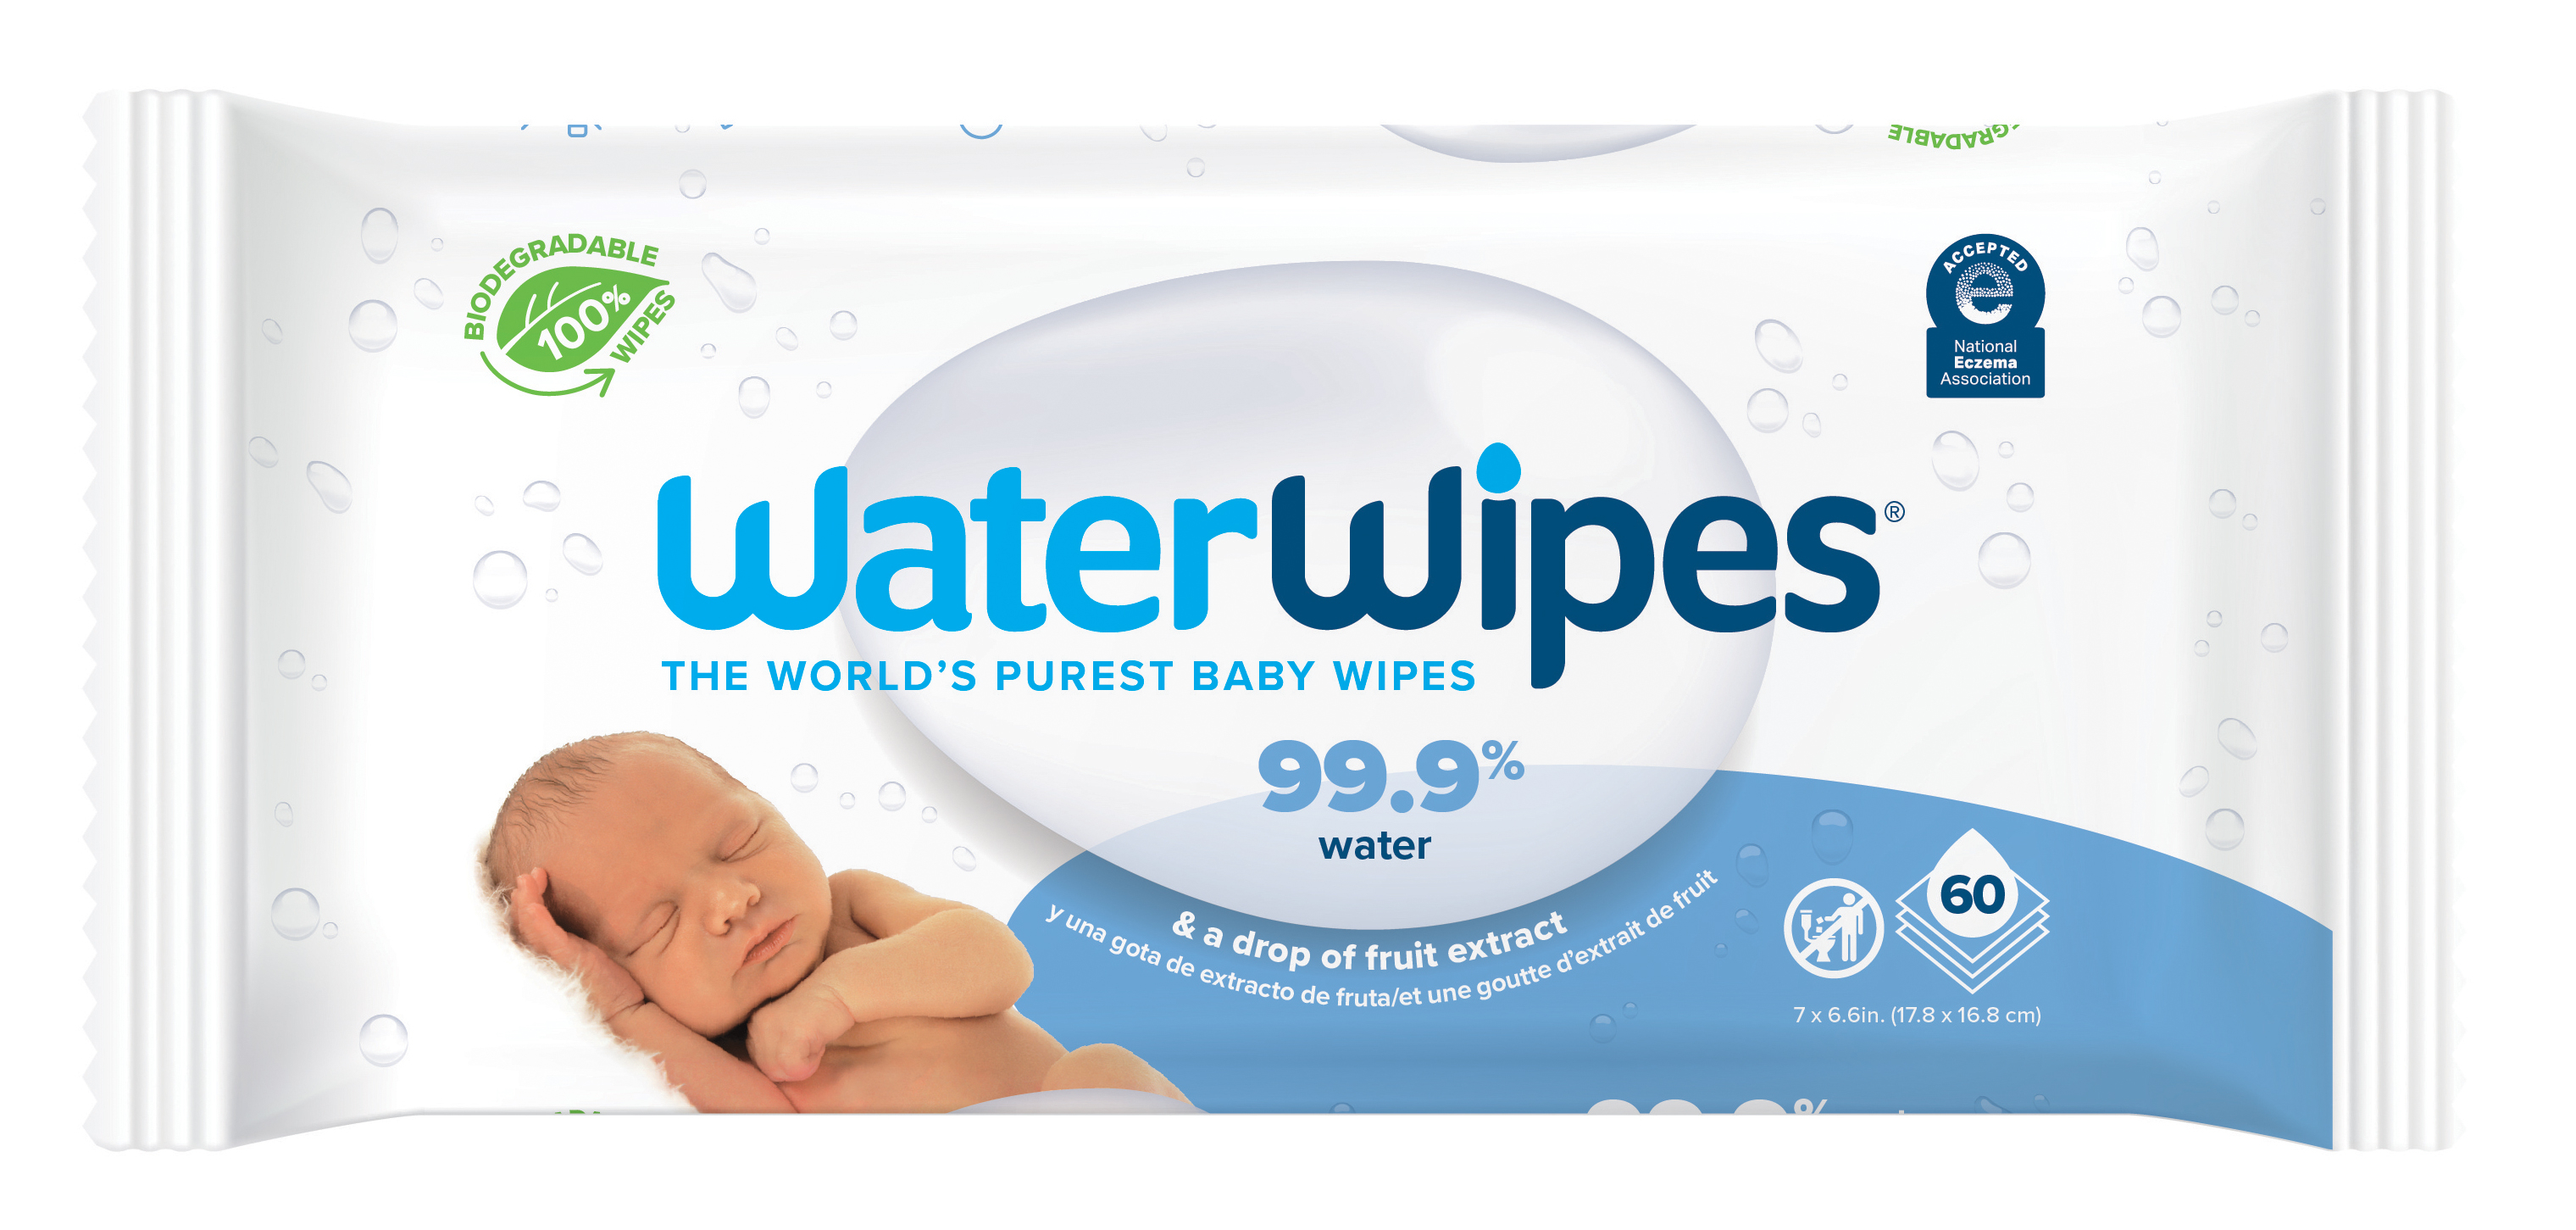 WaterWipes® Baby Wipes are Now 100% Biodegradable and Plastic-Free, a First  for Major U.S. Baby Brands